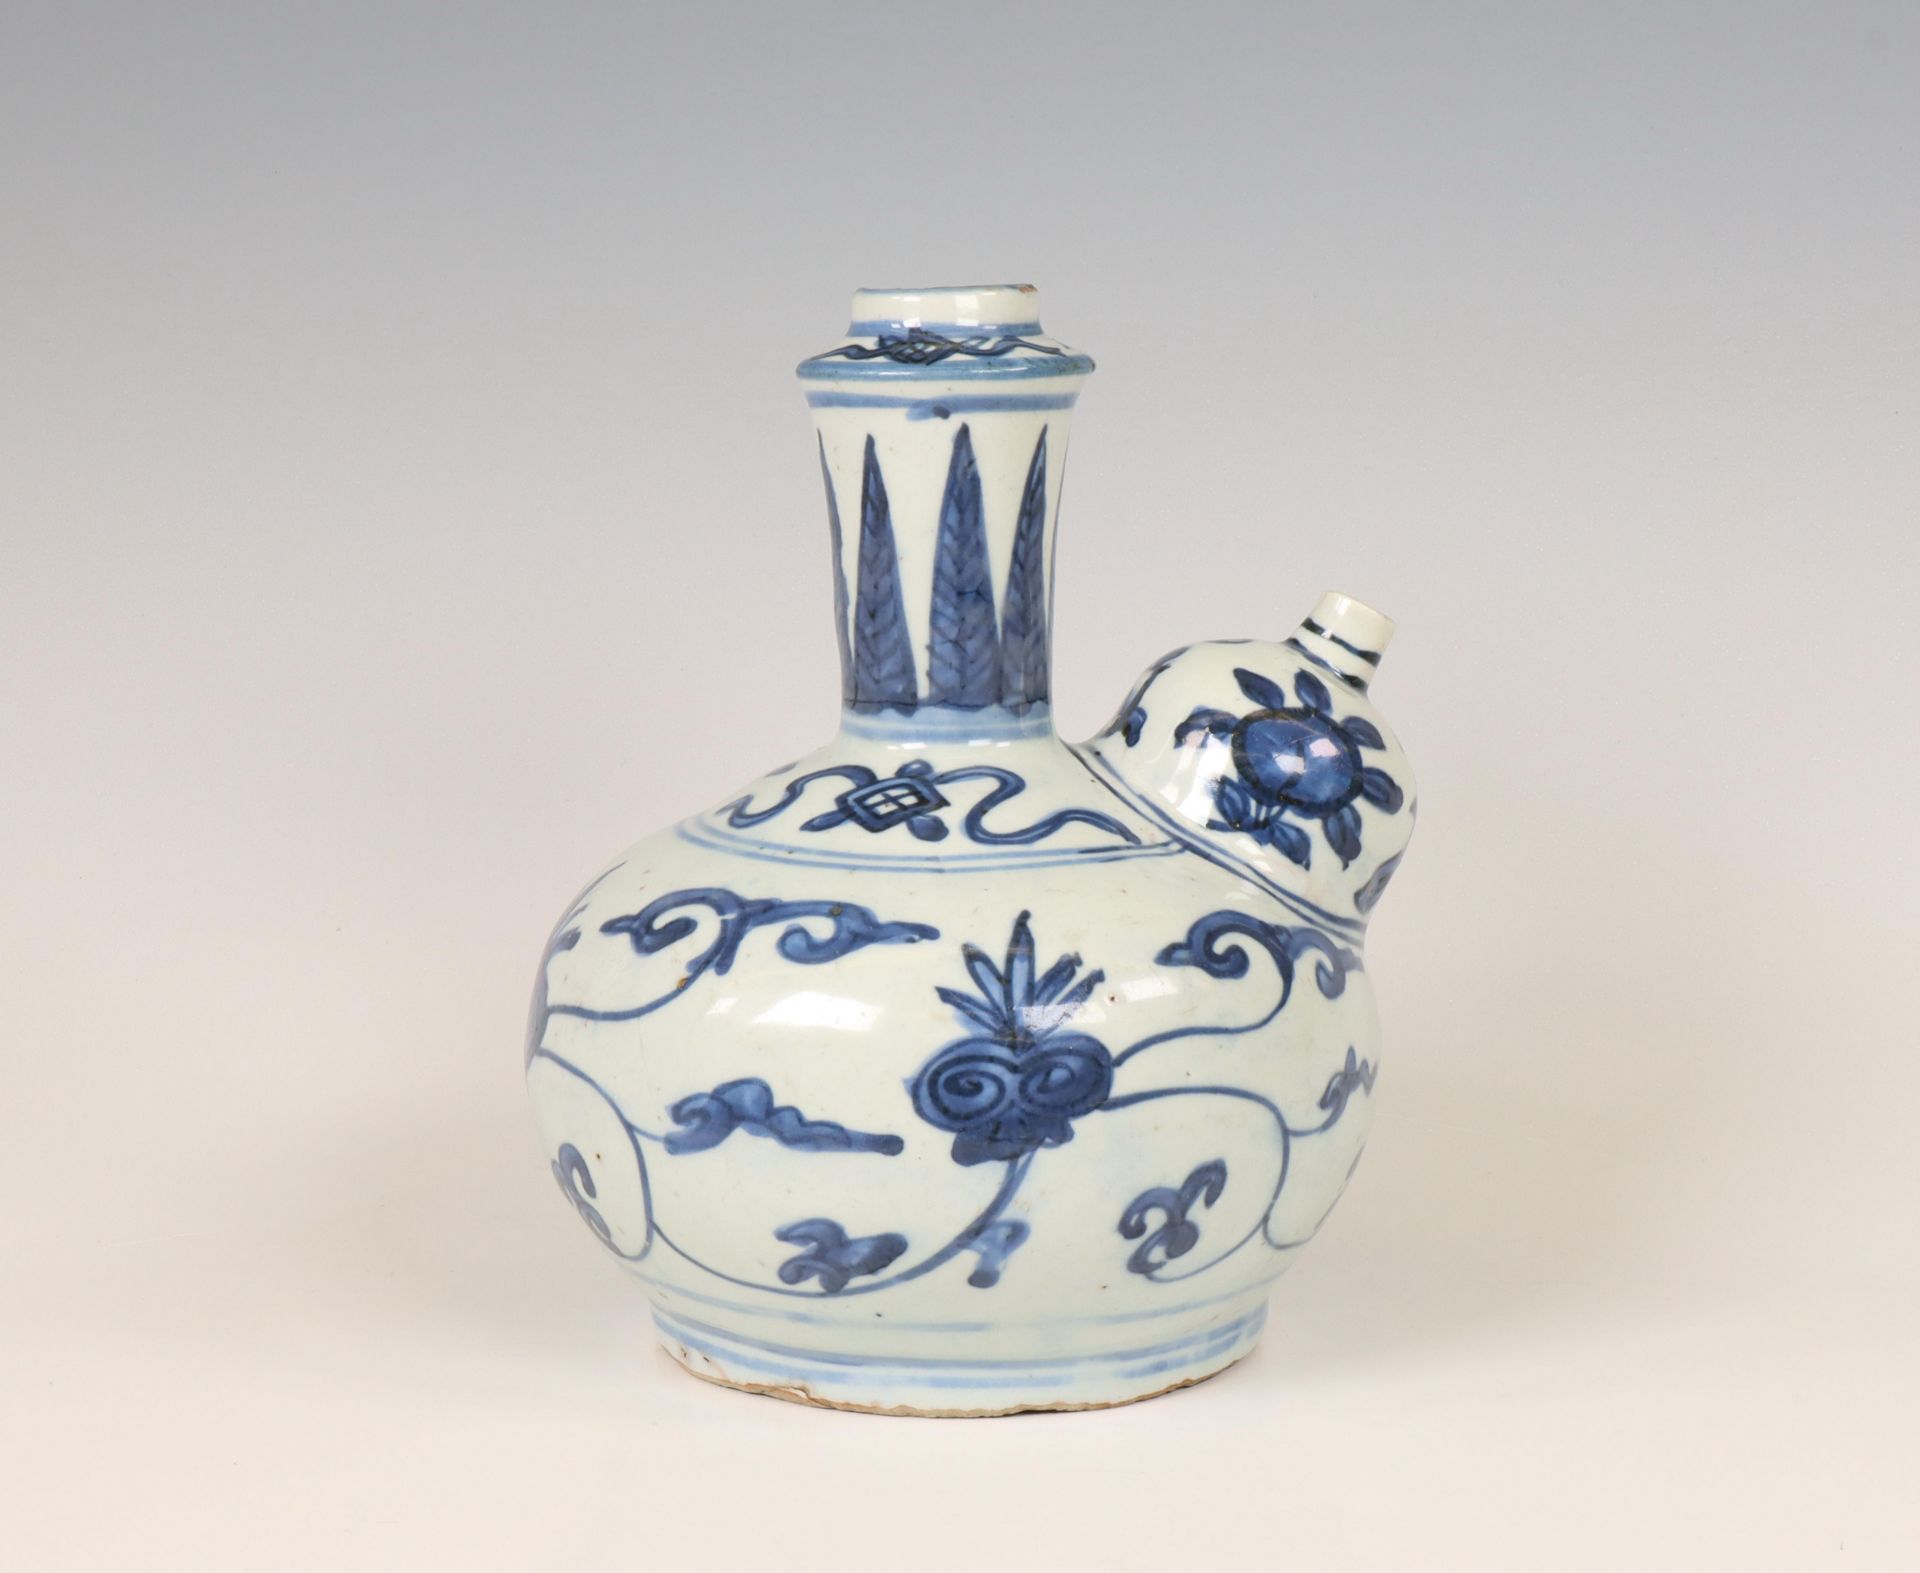 China, blue and white porcelain kendi, late Ming dynasty (1368-1644), - Image 2 of 6